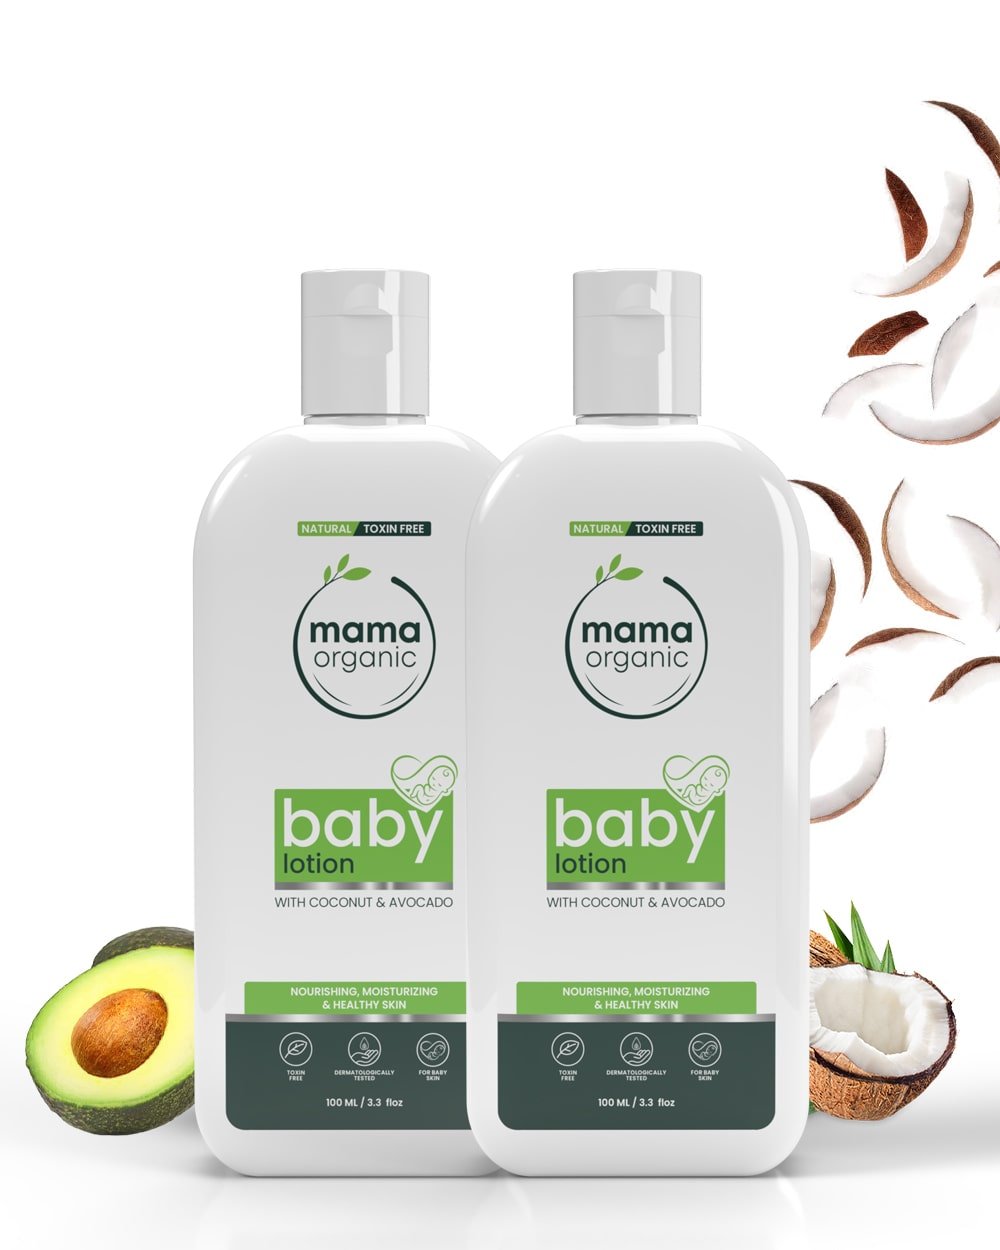 Baby Lotion 100ml Combo For Moisturising & Healthy Skin - Natural & Toxin-Free - MamaOrganic